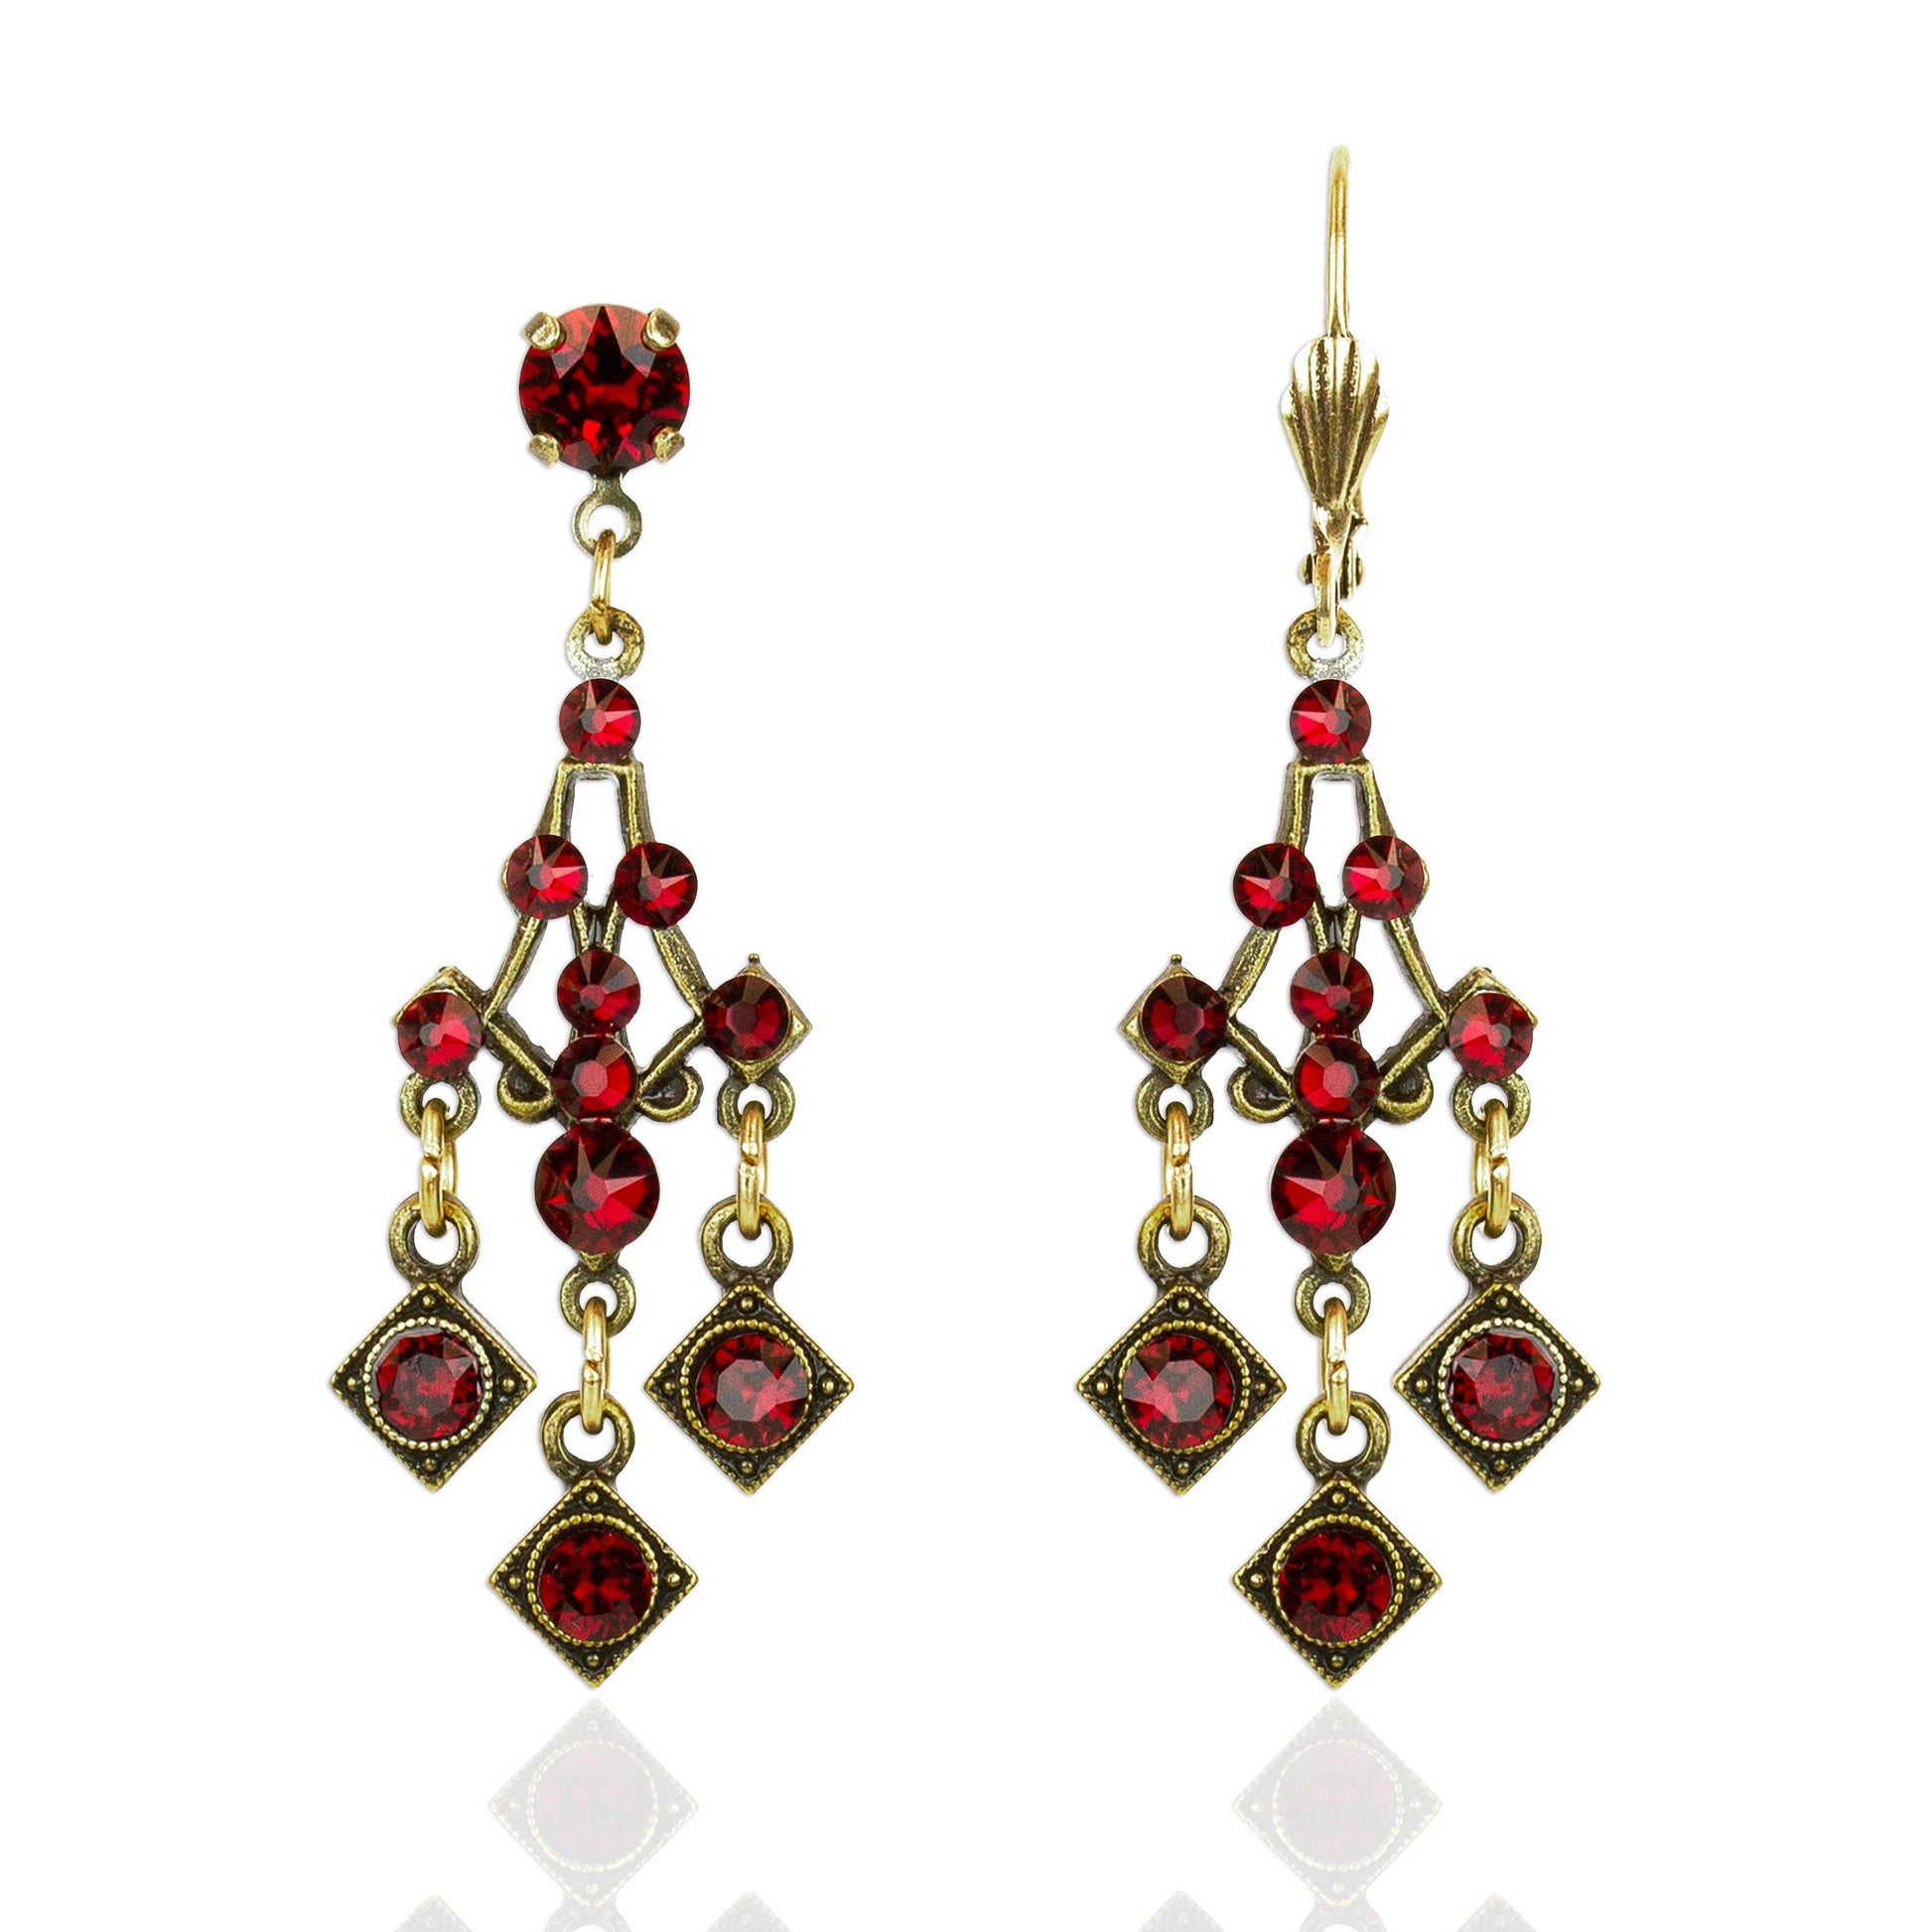 Sienna Red Crystal Statement Earrings: Leverback - Sugar River Shoppe